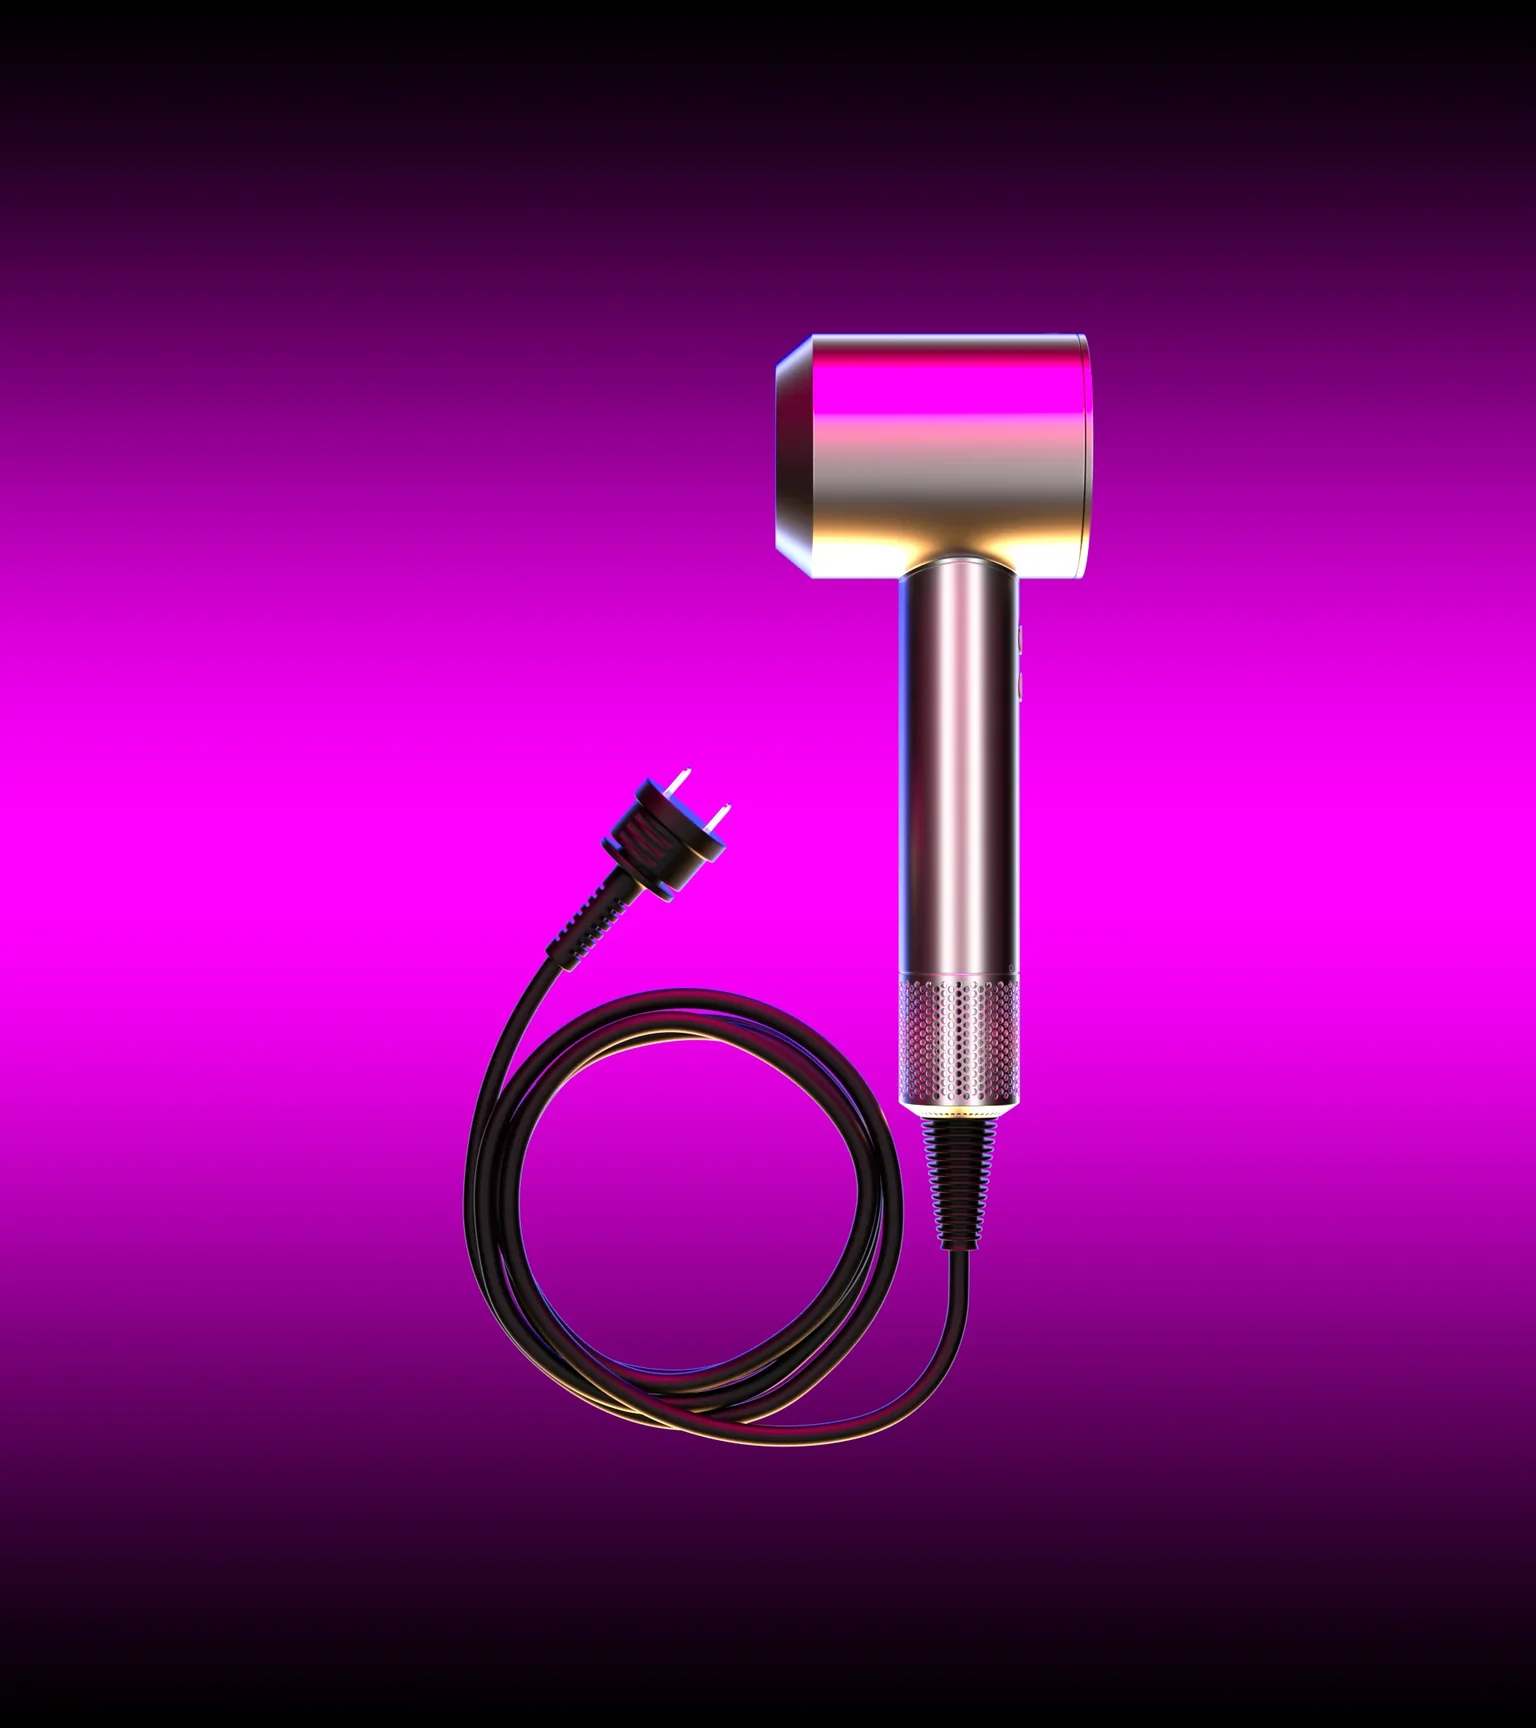 Pink gradient background with 3D rendering of a Dyson hairdryer.